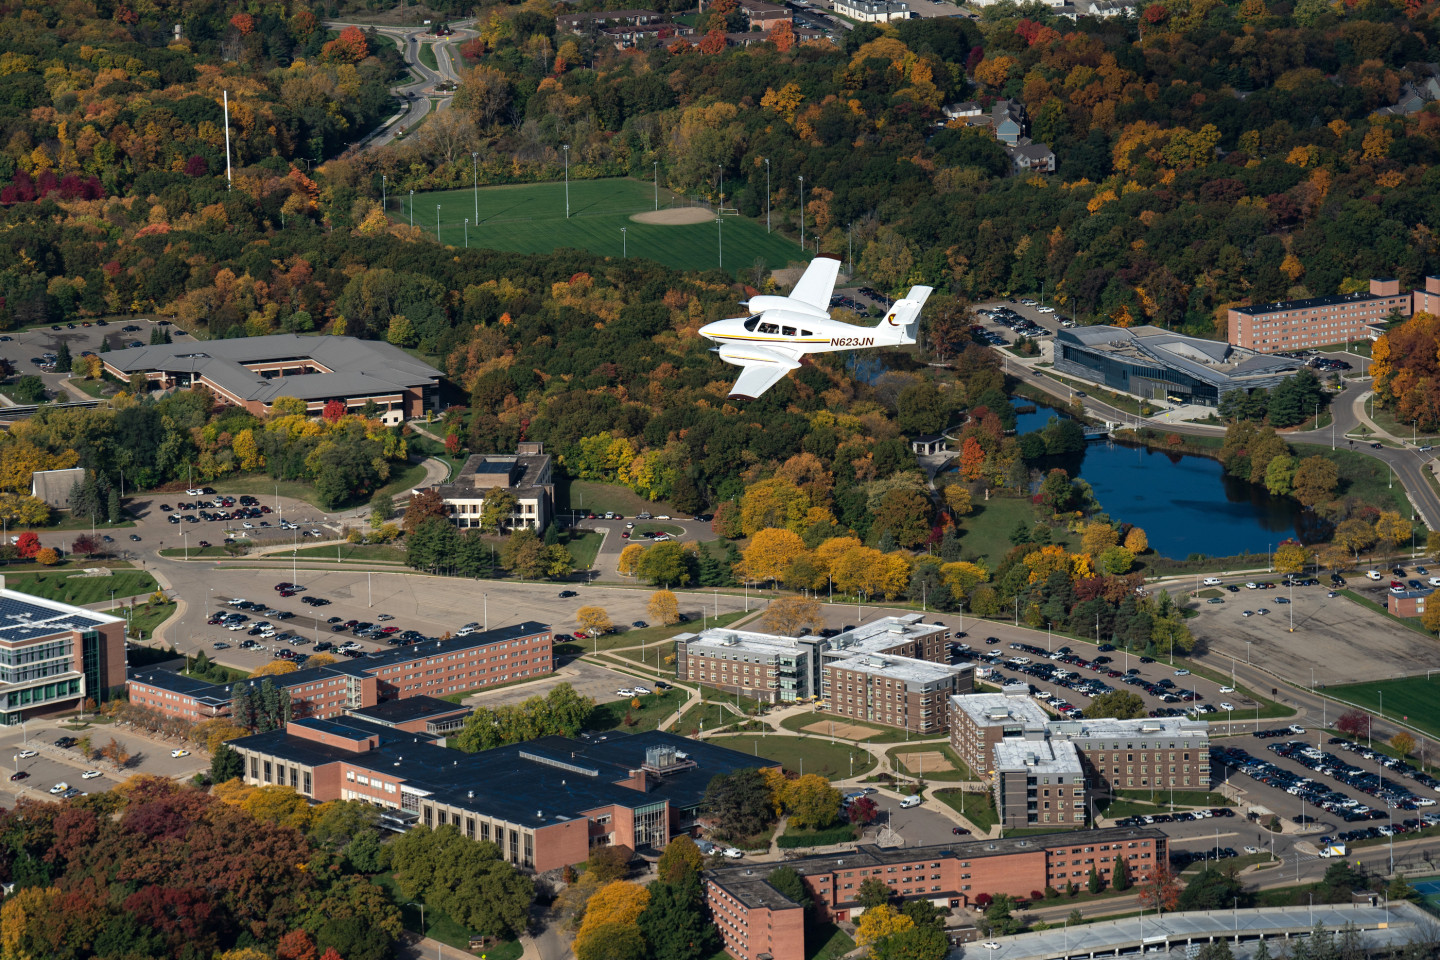 A small airplane flying in the sky over Western's campus.